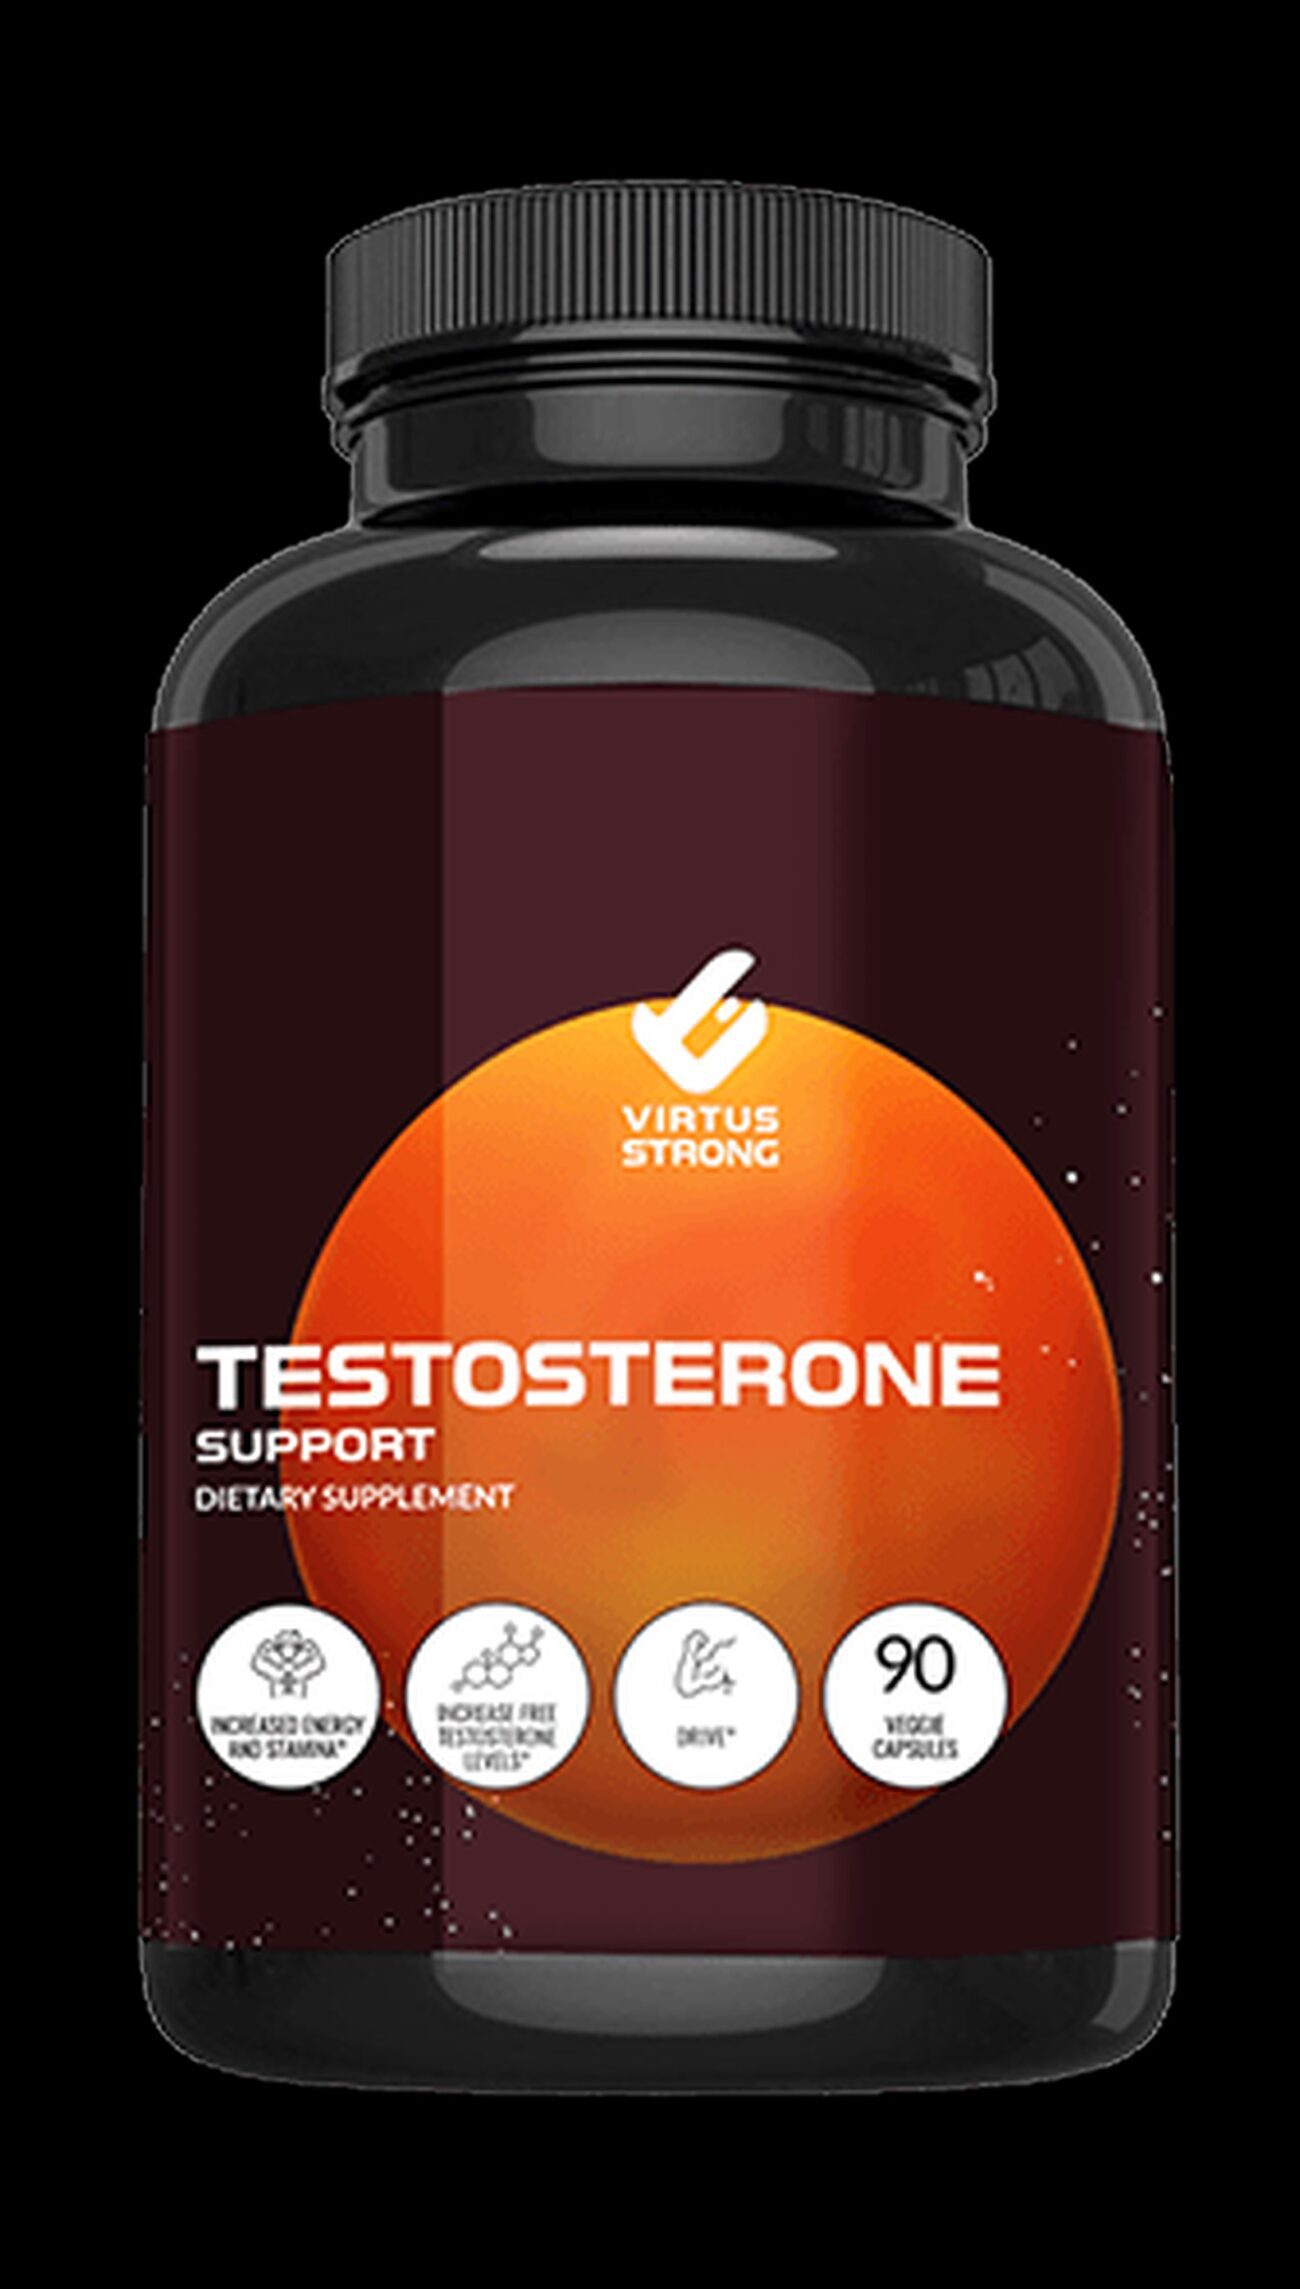 Its finally time to hit the gym after lockdown! Luckily for those looking to beef up faster, Virtus is here to help Boost Testosterone Levels